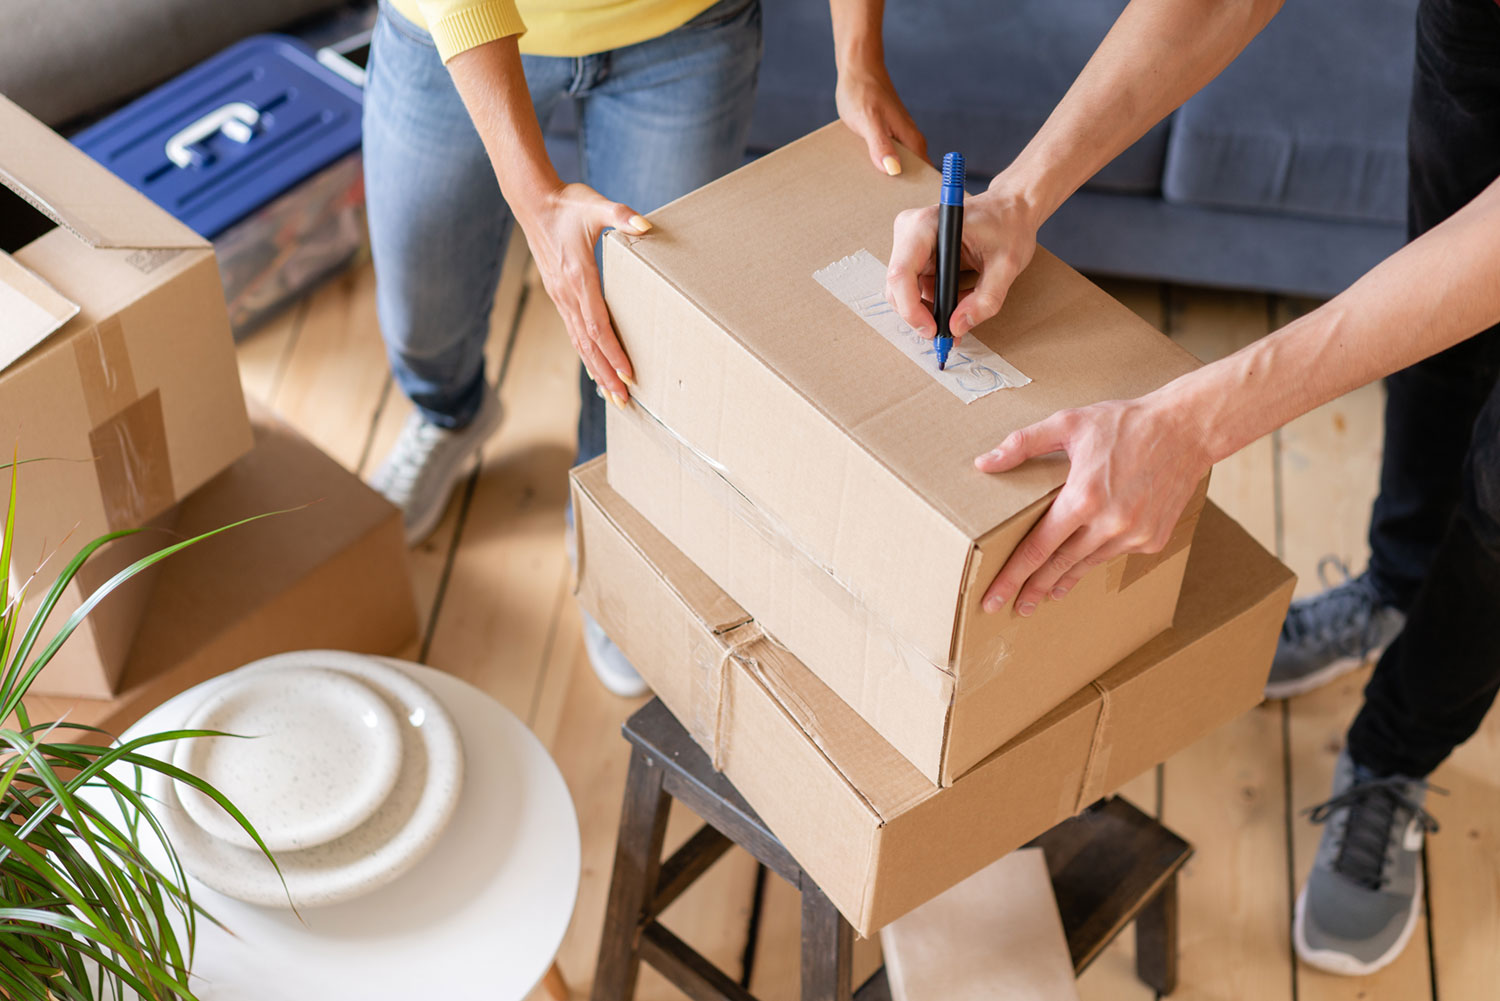 6-tips-for-labeling-moving-boxes-like-a-pro-rabbit-movers-nyc